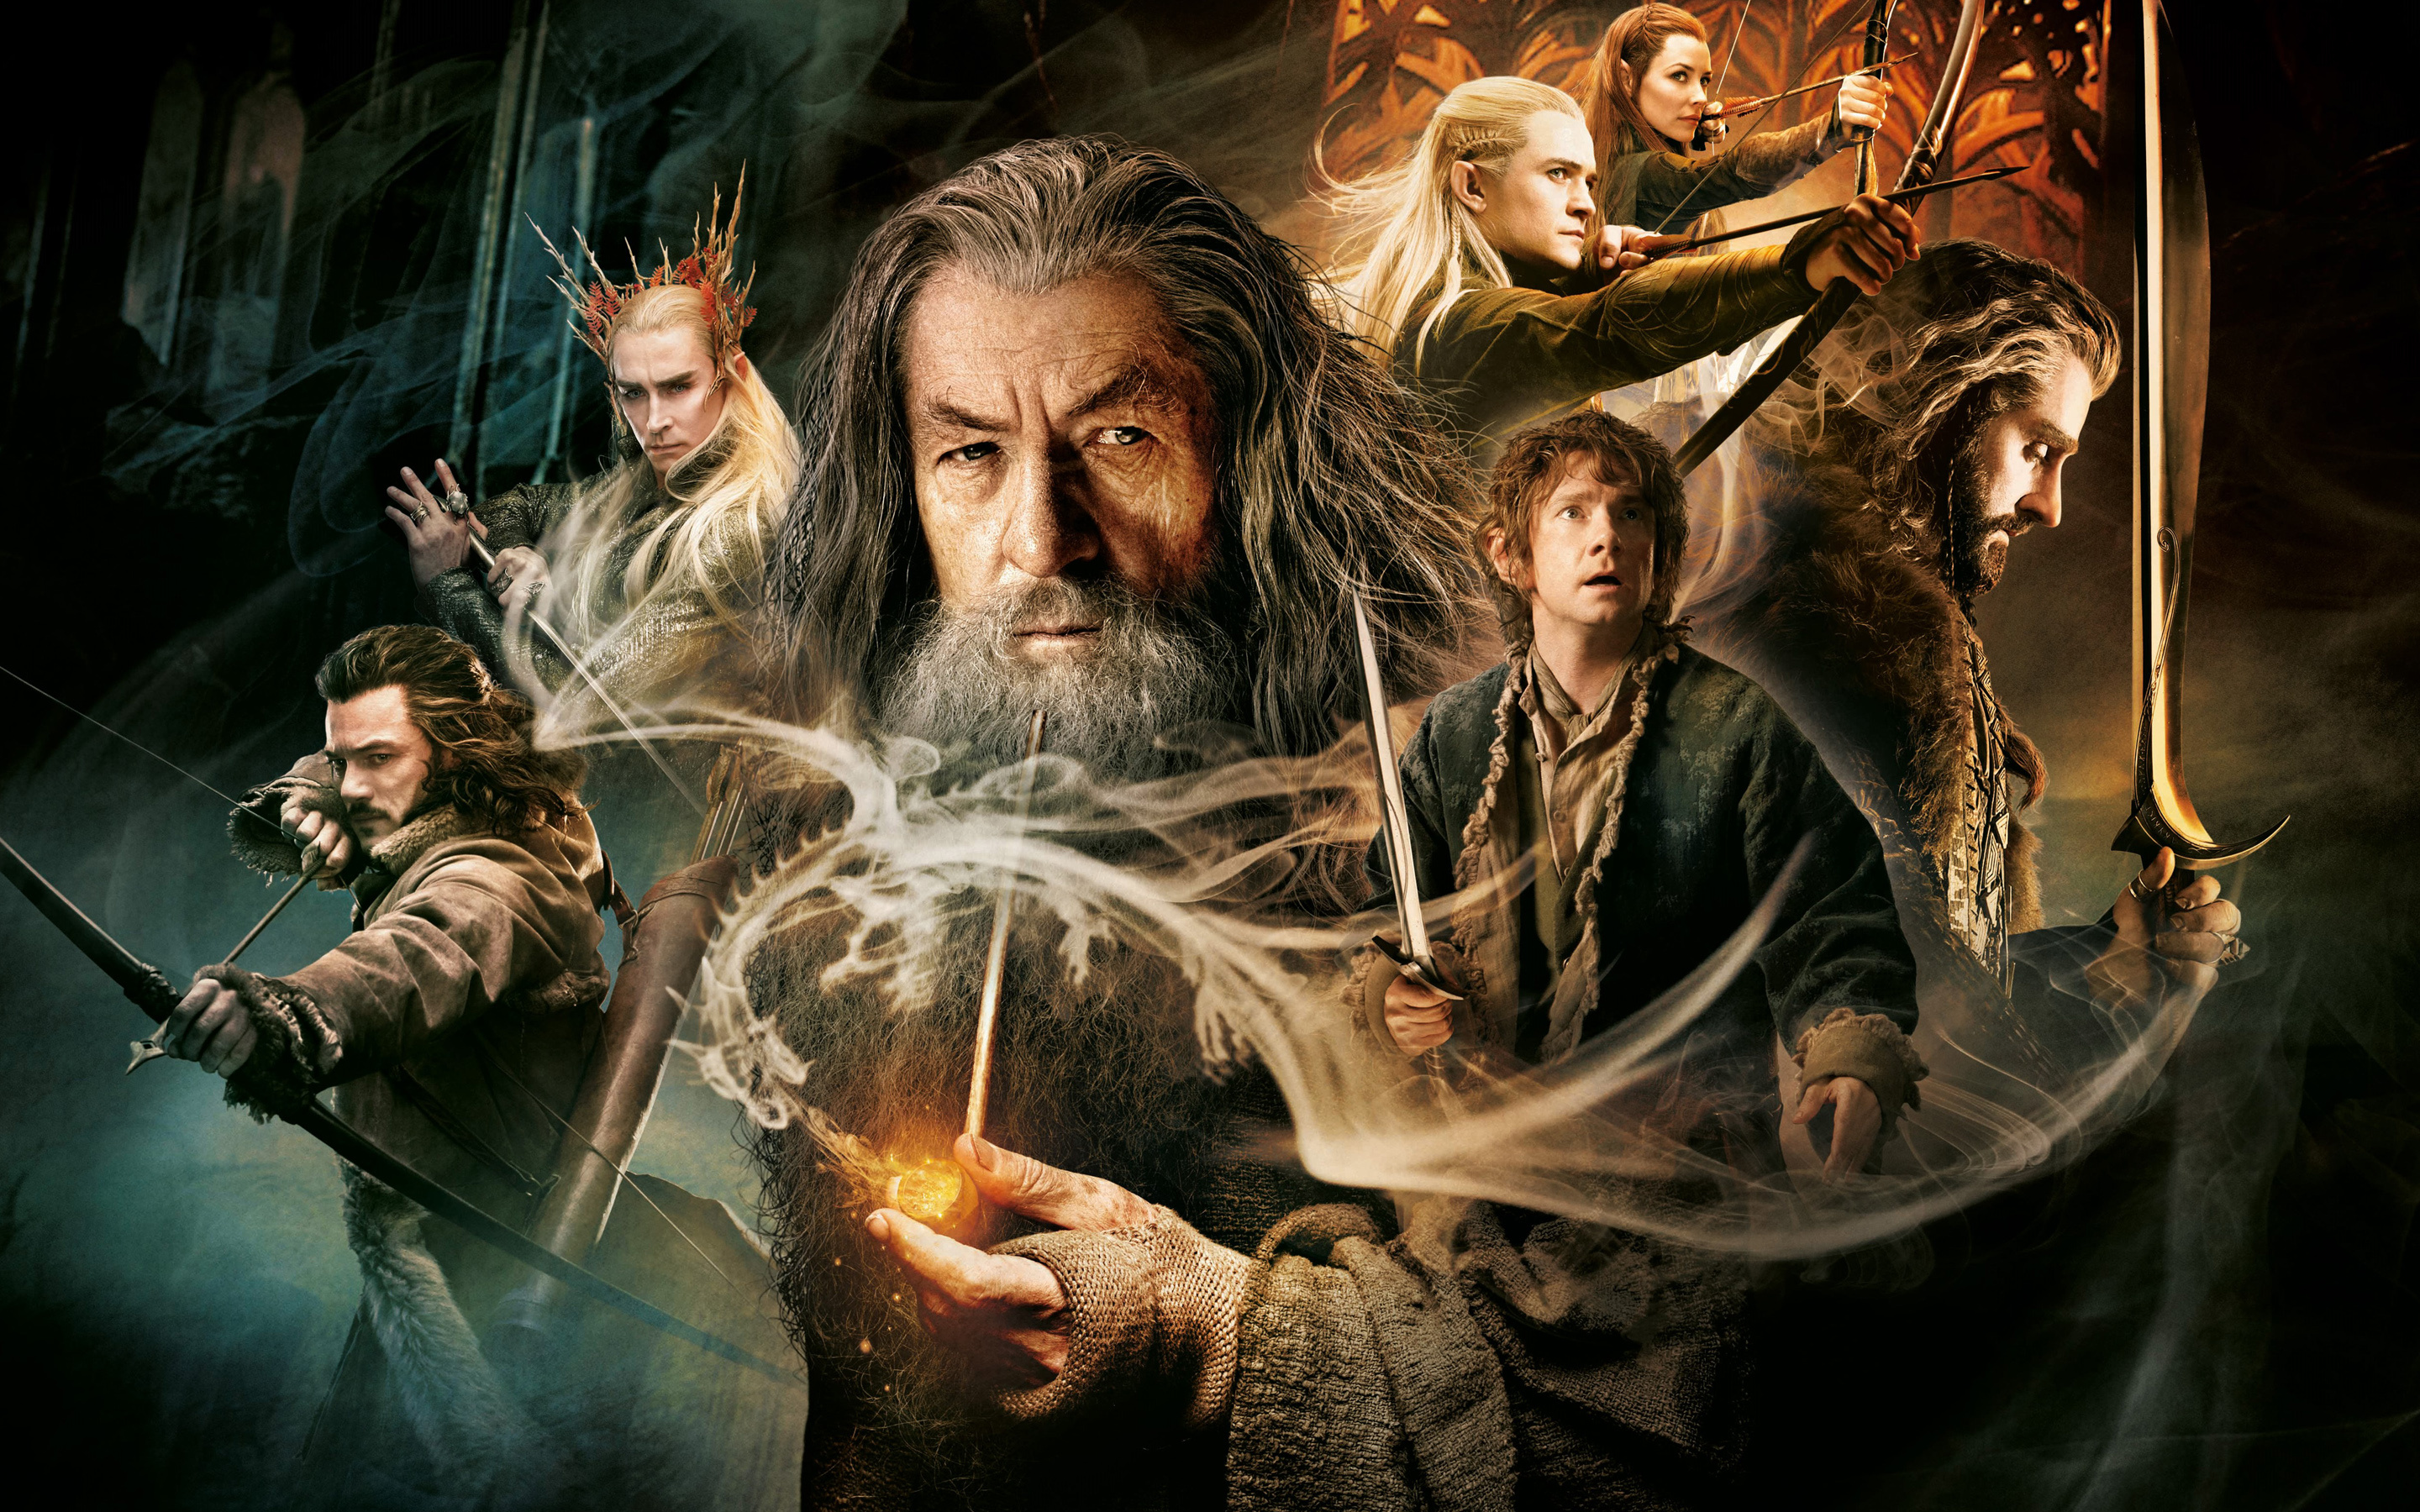 Gandalf wallpaper, High-quality images, Lord of the Rings, Legendary wizard, 2880x1800 HD Desktop